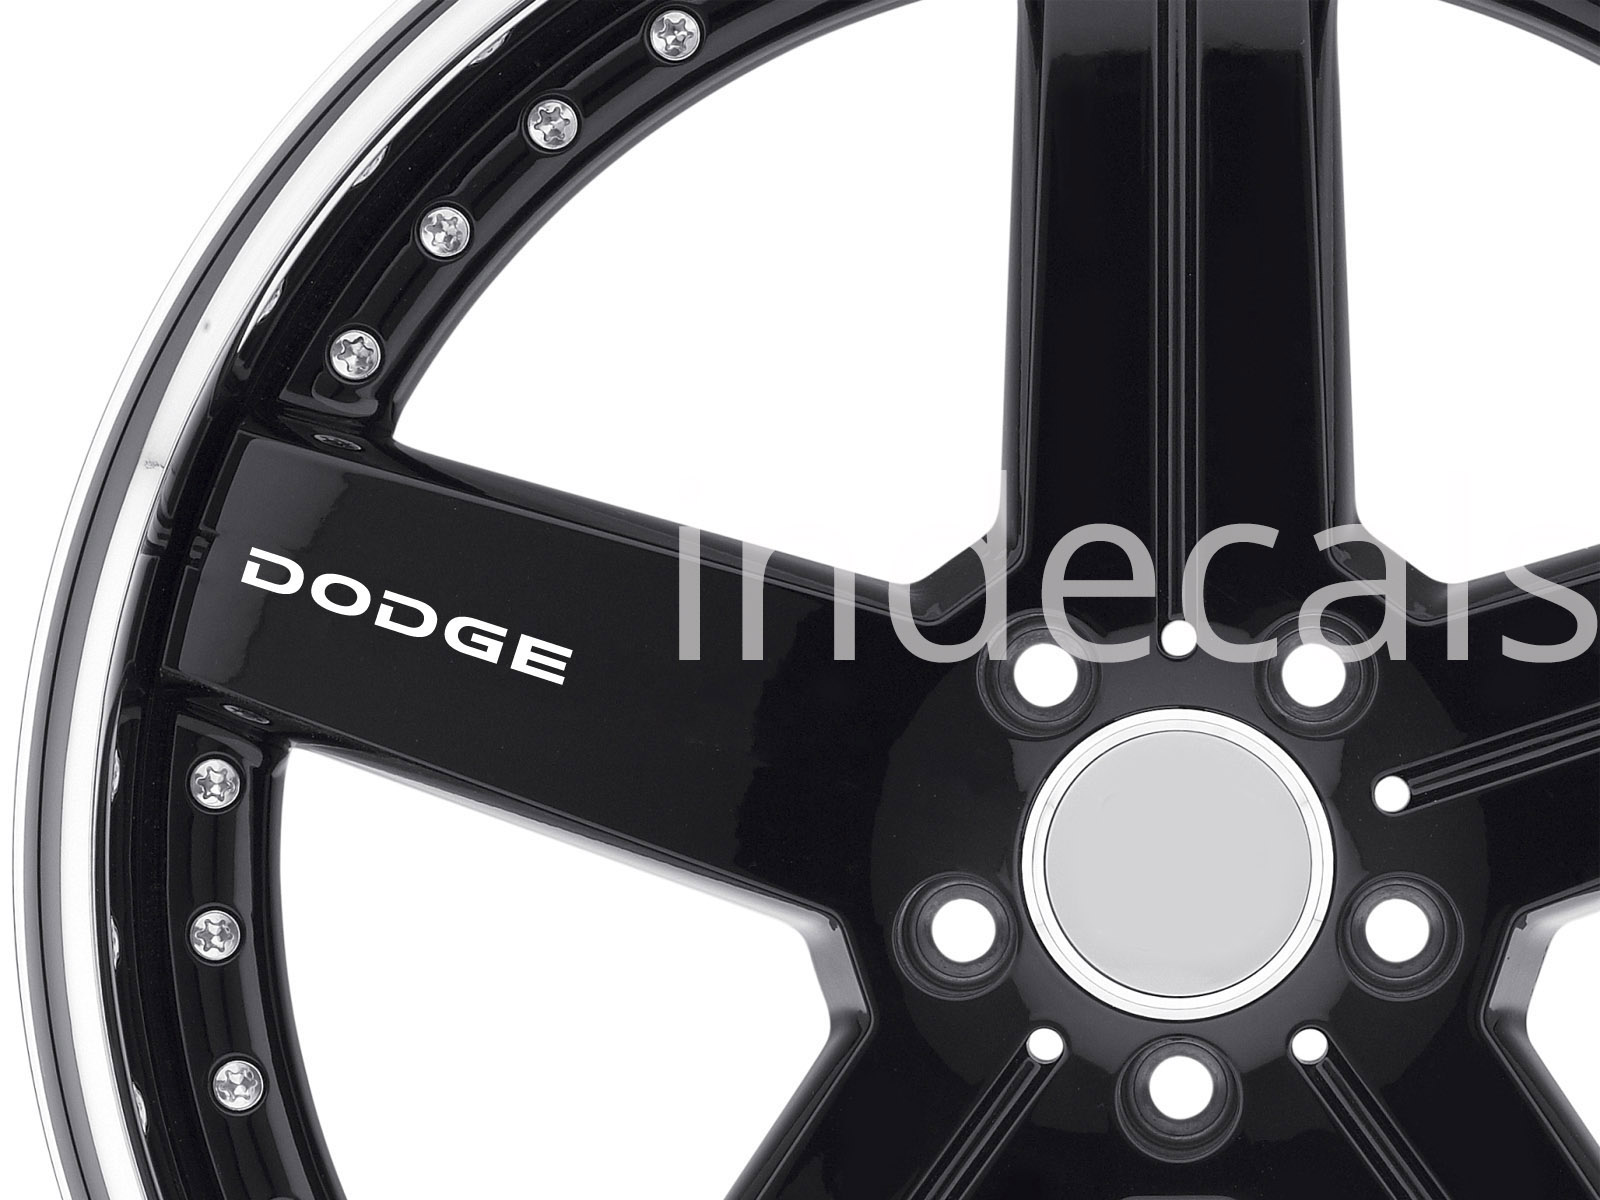 6 x Dodge Stickers for Wheels - White